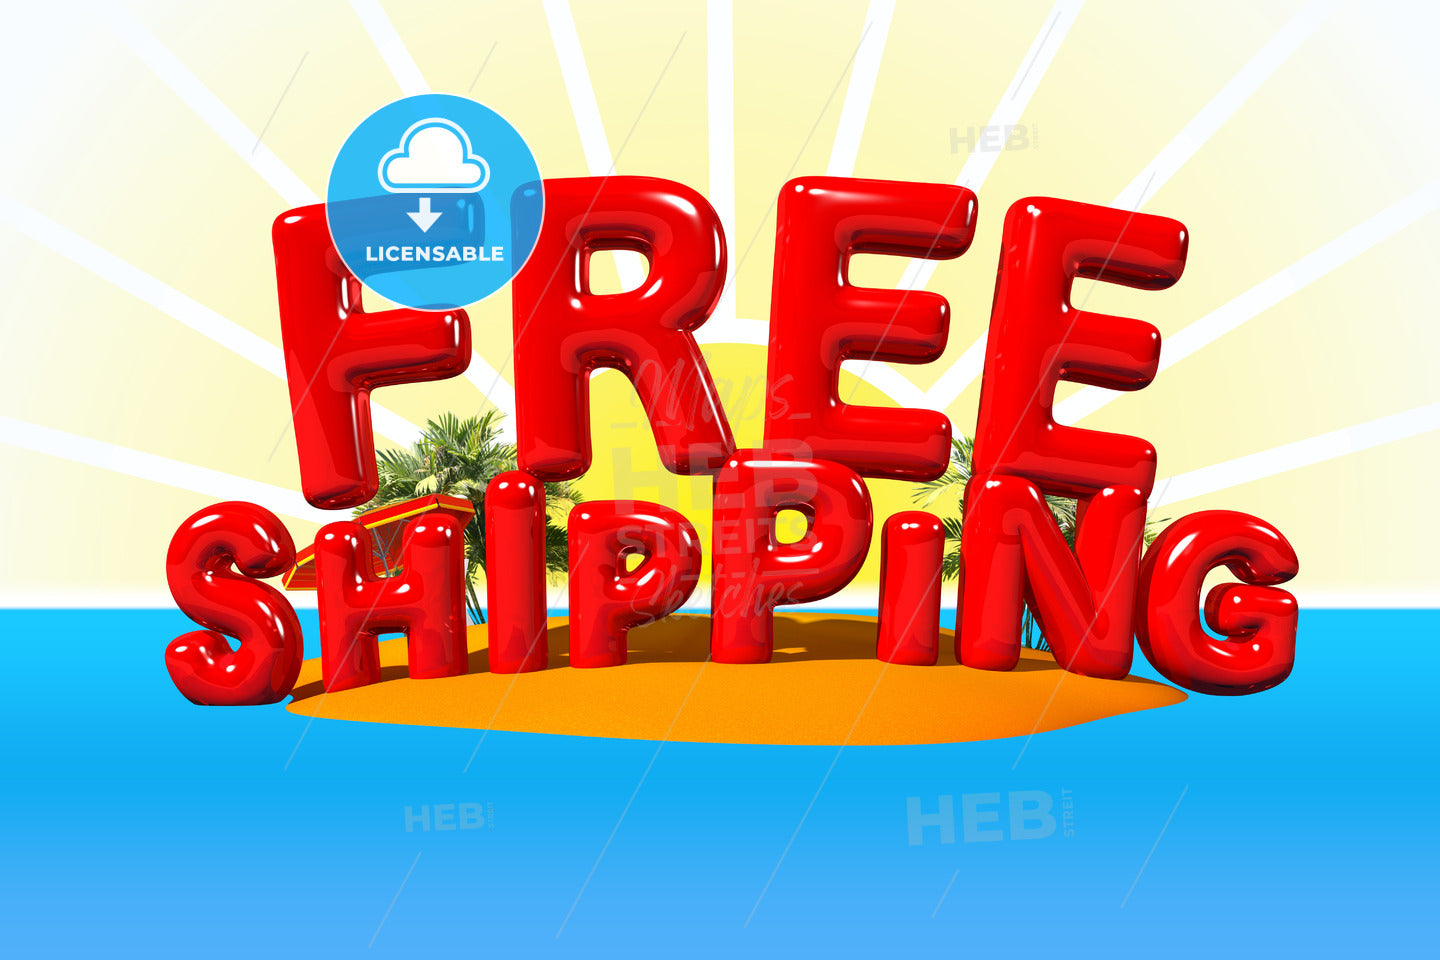 Free Shipping on Island – instant download